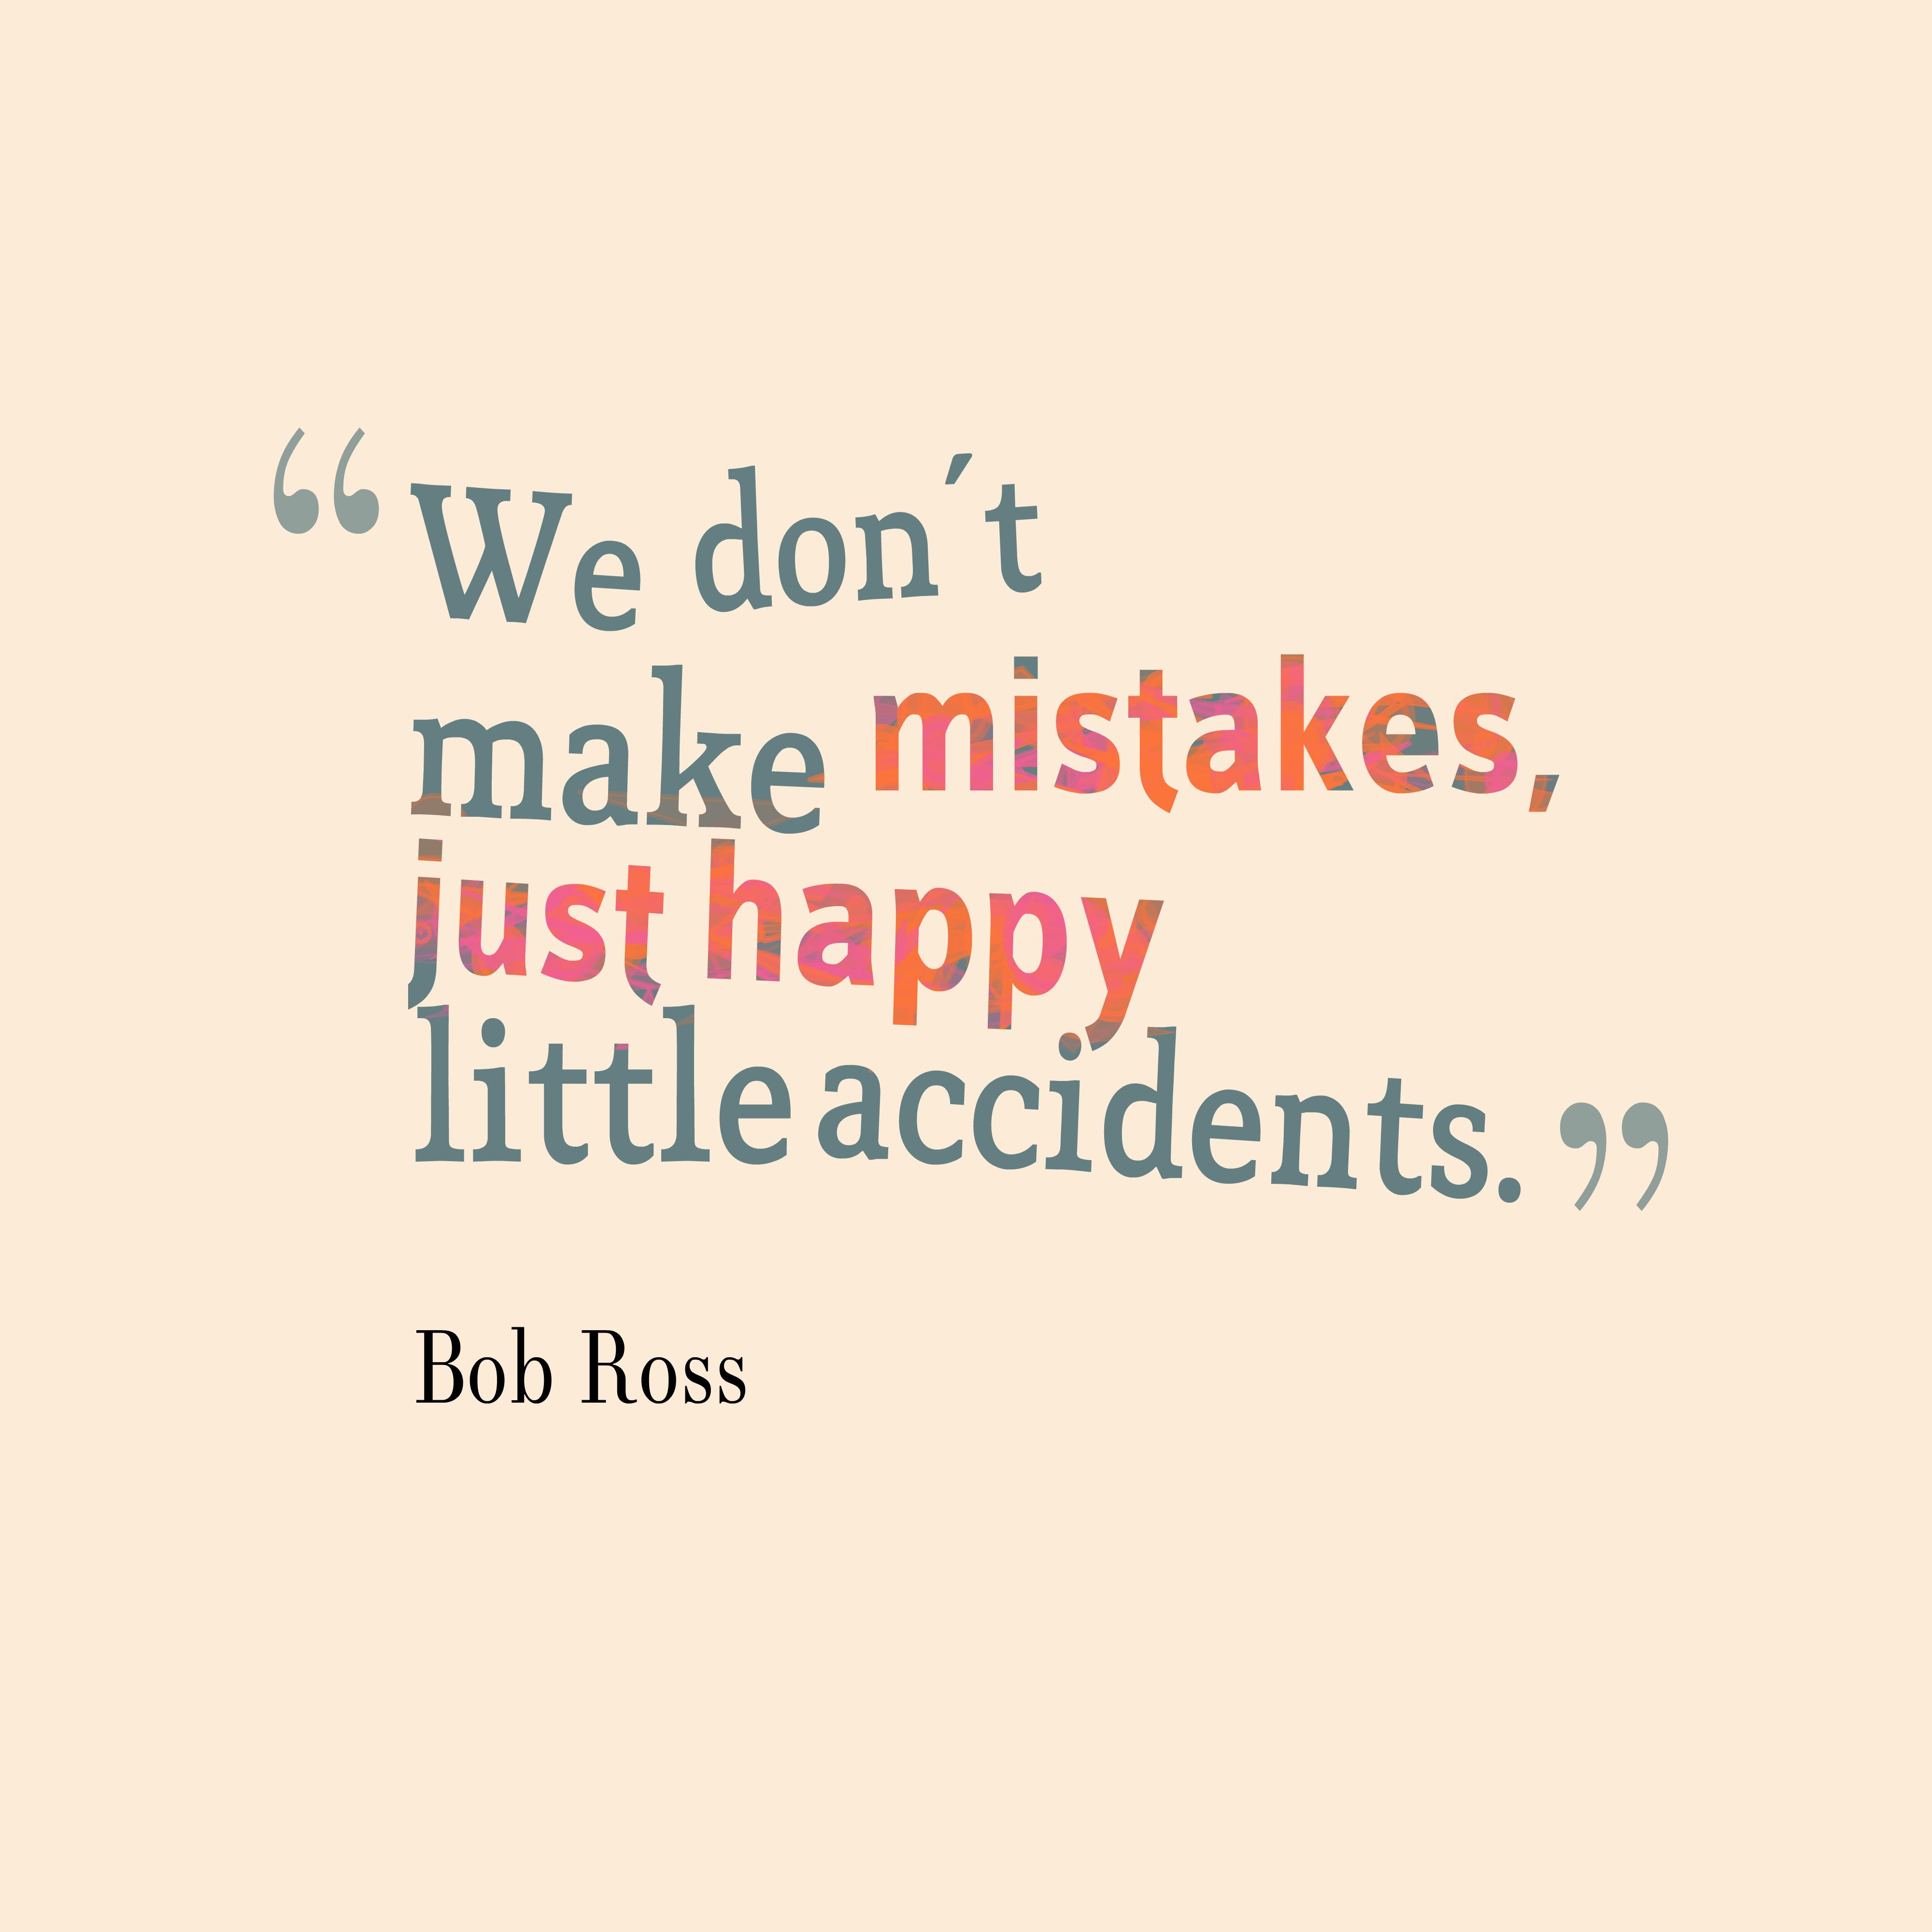 We don't make mistakes, just happy little accidents. Bob Ross